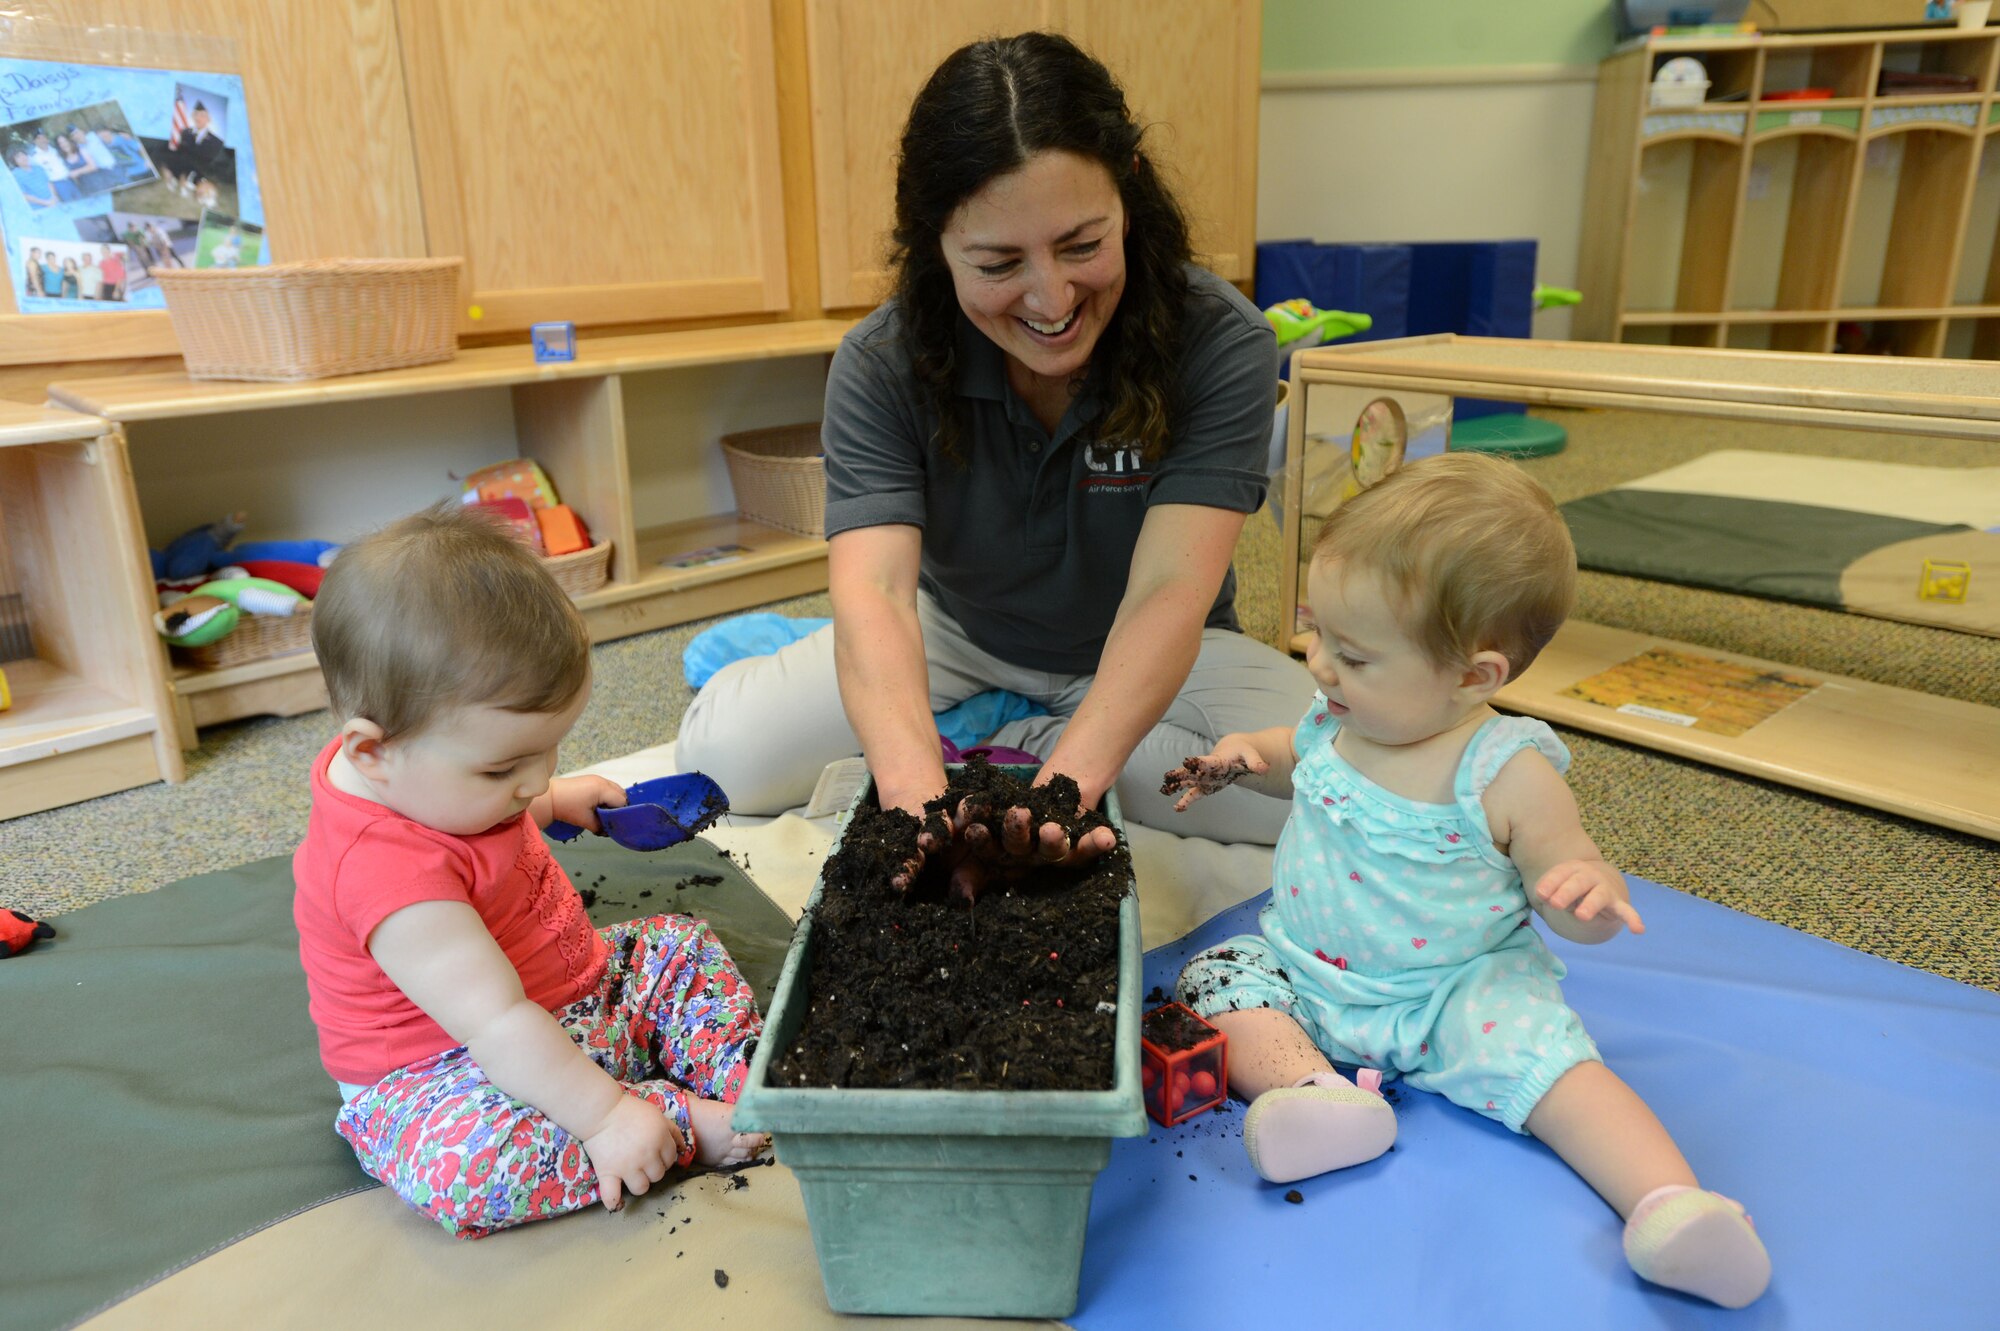 Daisy Gonzalez, 20th Force Support Squadron Chandler Cornell Child Development Center infant program lead, plants seeds in potting soil with Team Shaw children at Shaw Air Force Base, S.C., April 22, 2016. The 20th Force Support Squadron Child and Youth Services Parent Advisory Committee and CDC staff teamed up to provide nature-themed activities for children in celebration of Earth Day. (U.S. Air Force photo by Senior Airman Zade Vadnais)